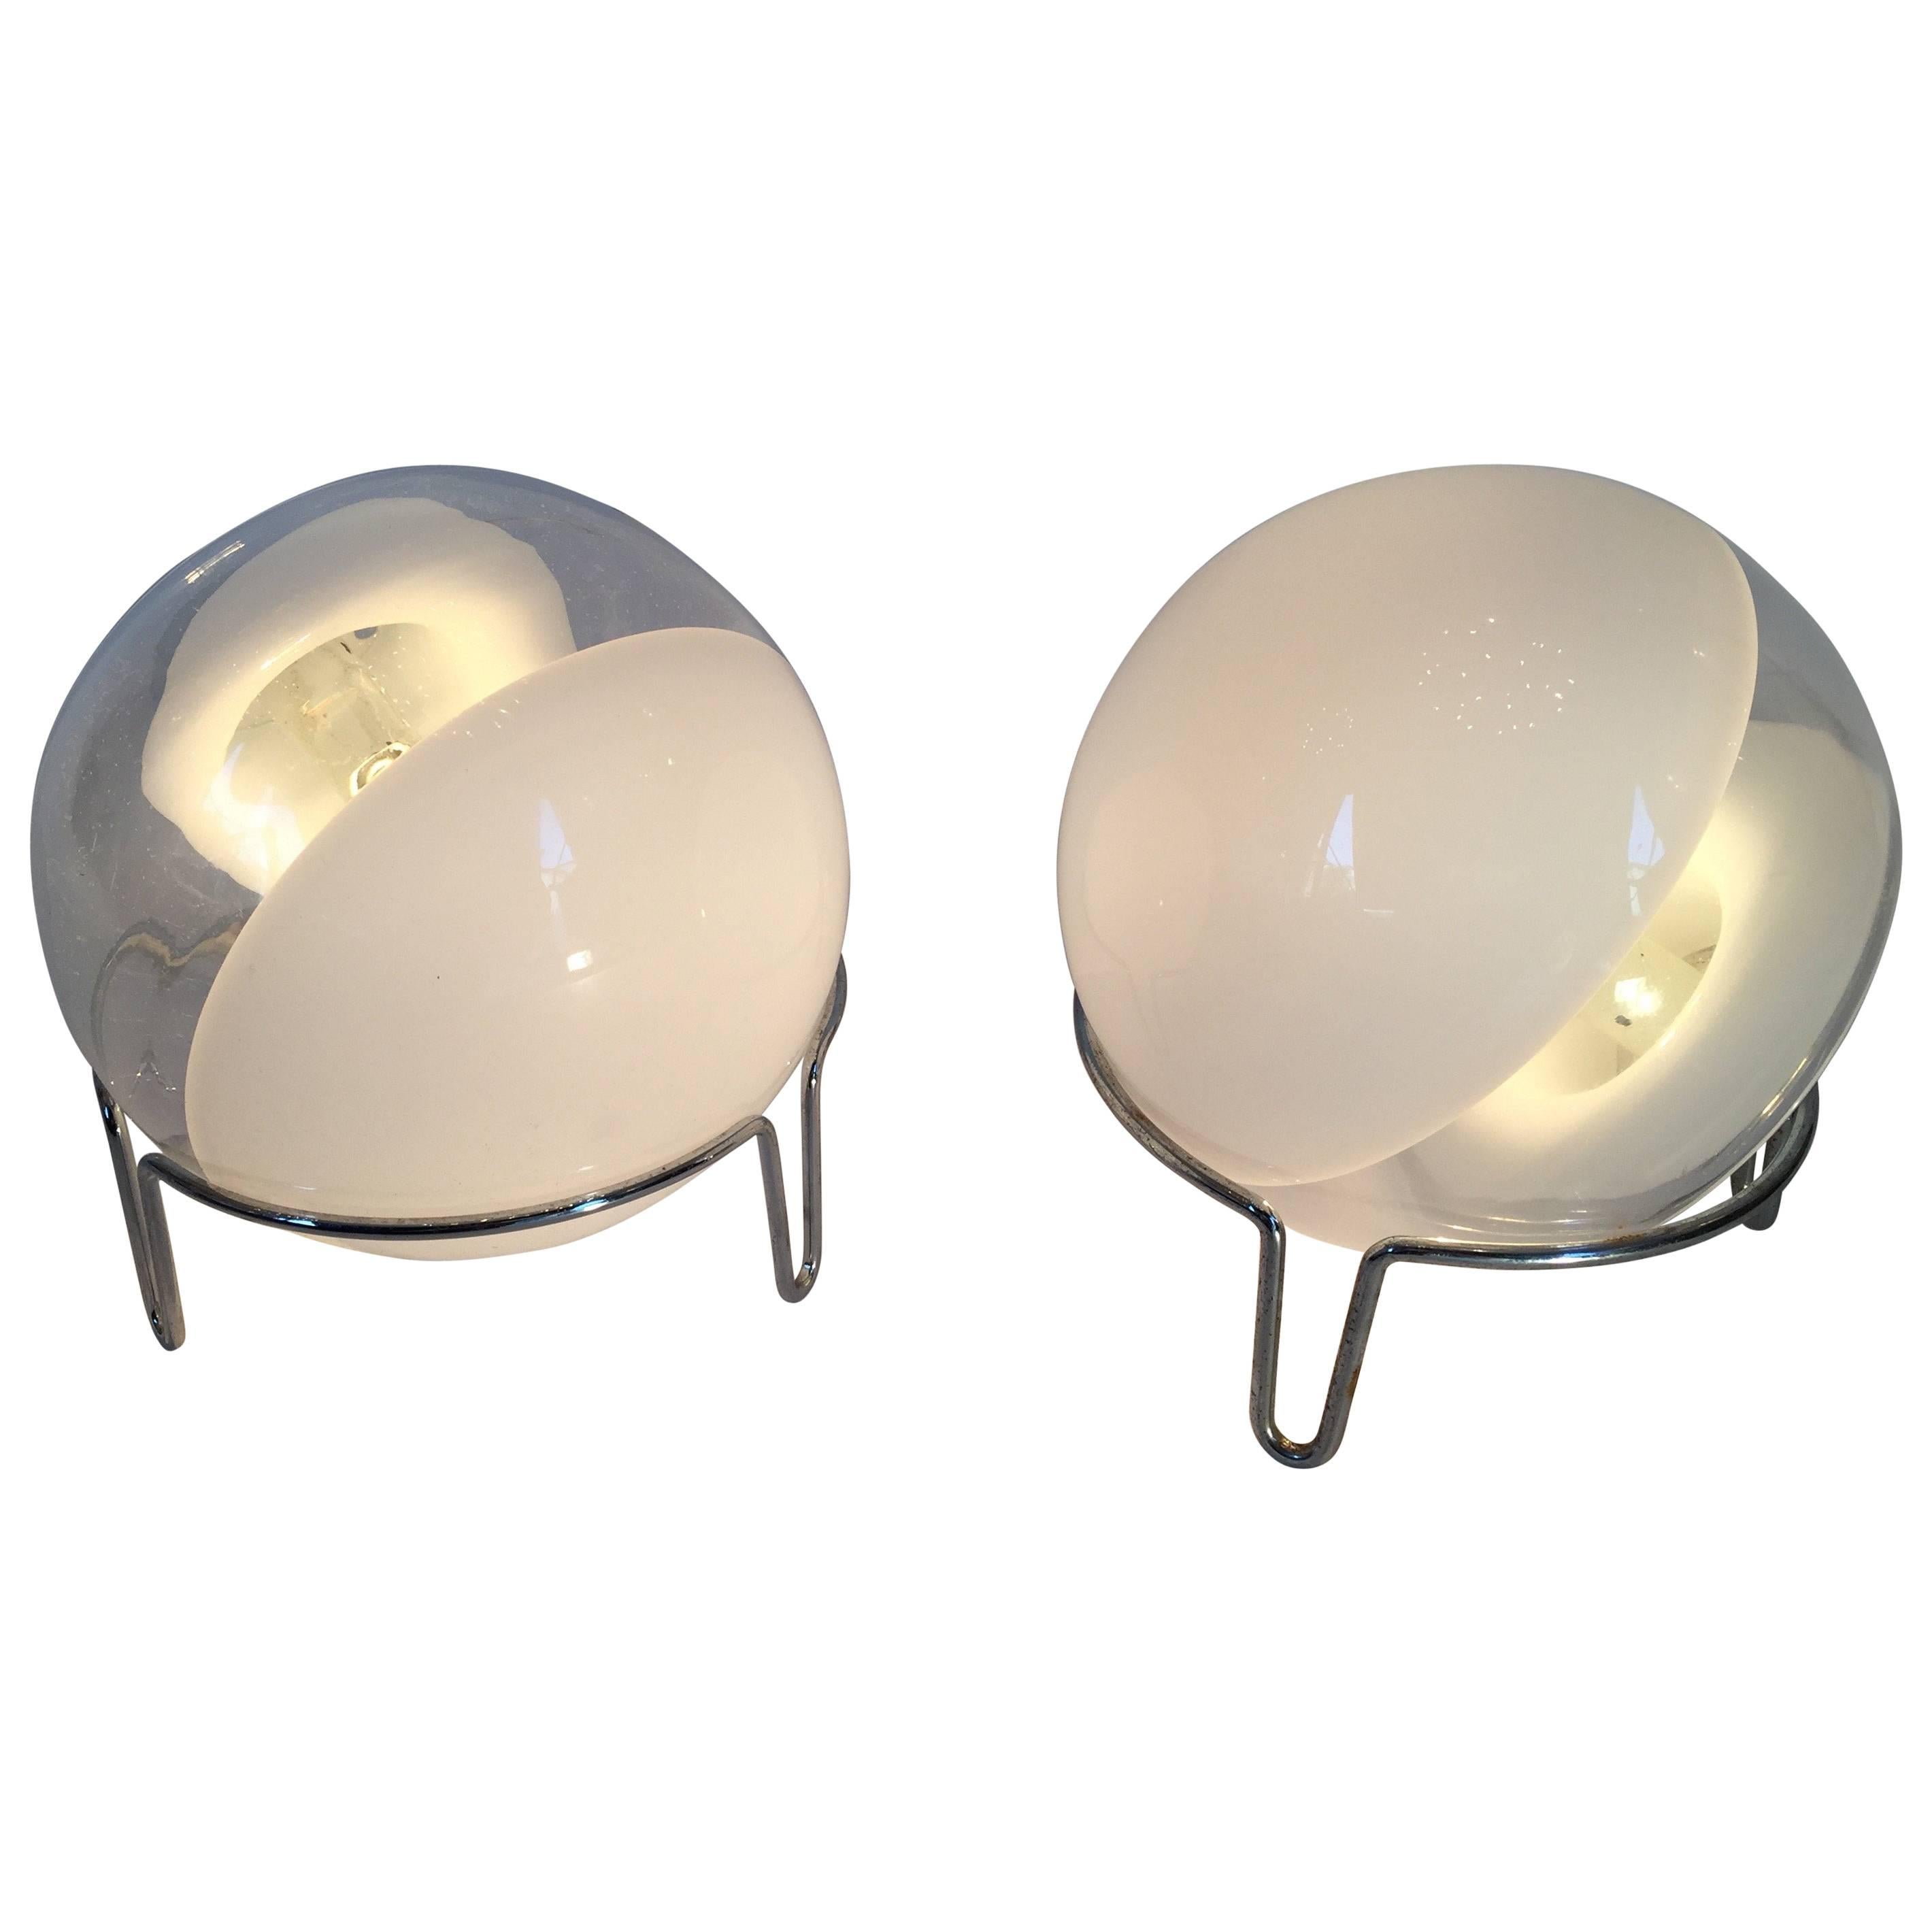 Pair of Lamps by Angelo Mangiarotti for Skipper, Italy, 1980s